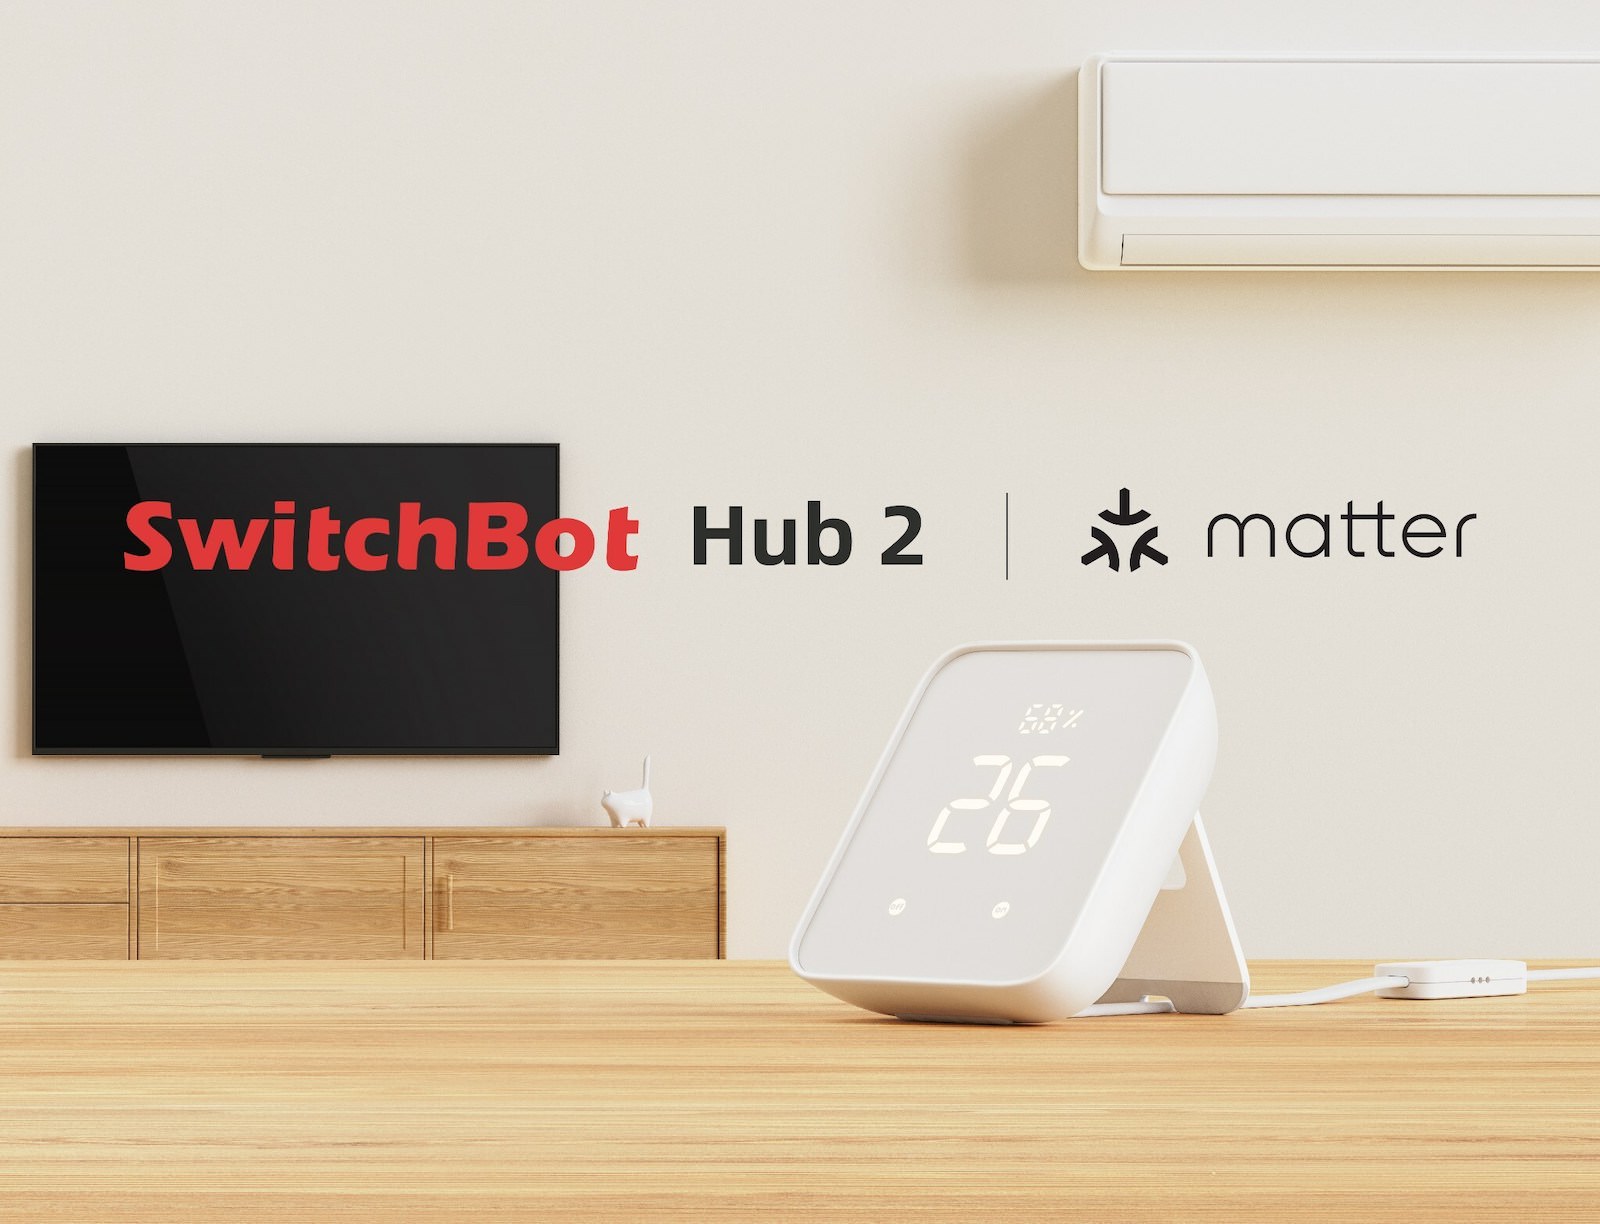 Switchbot 2 coming with mattert support and homekit